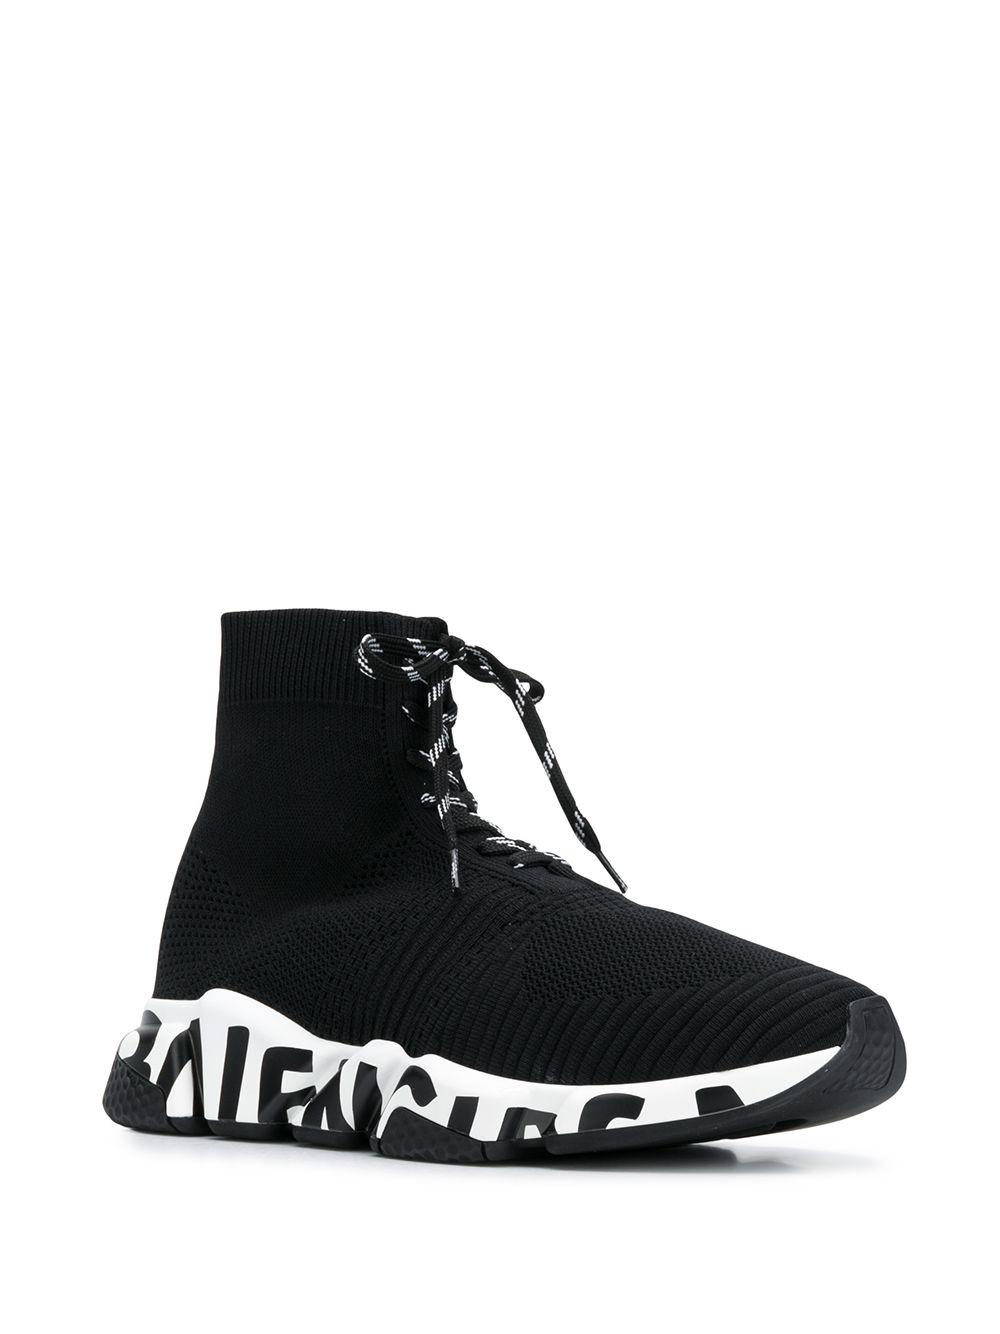 Balenciaga Rubber Lace-up Sock Trainers in Black for Men - Lyst